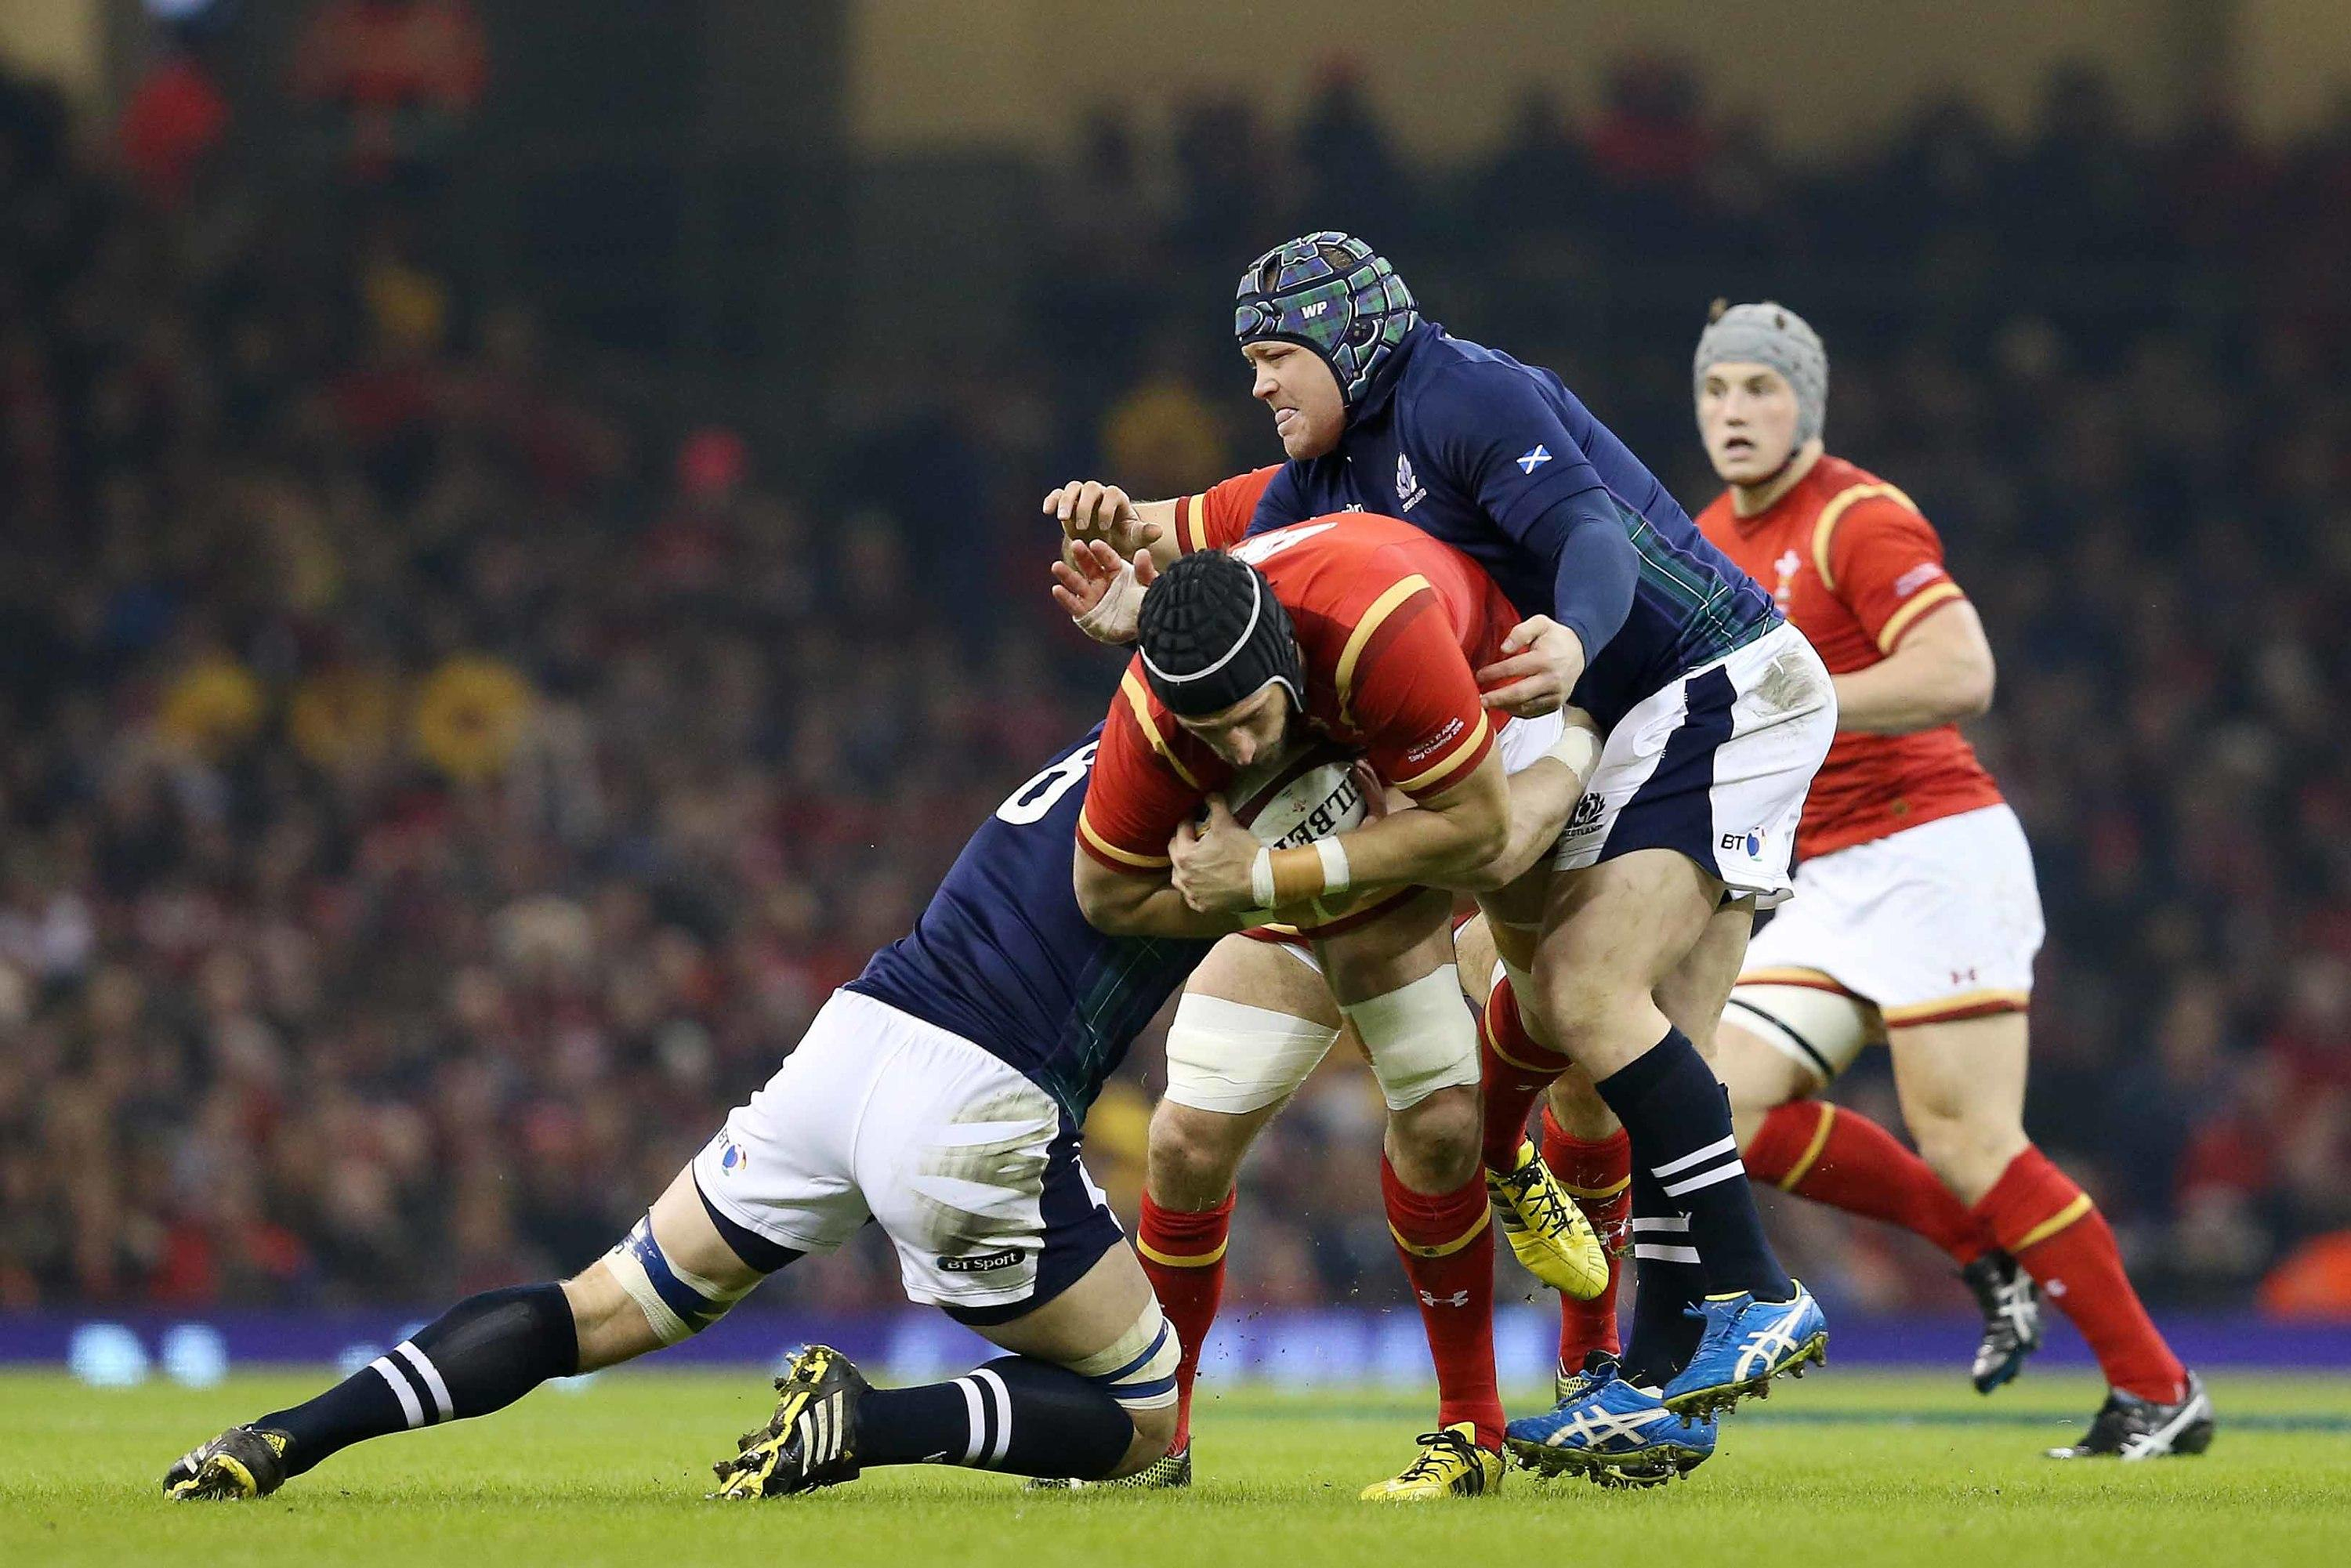 Rugby: Scottish pillar “WP” Nel bows out